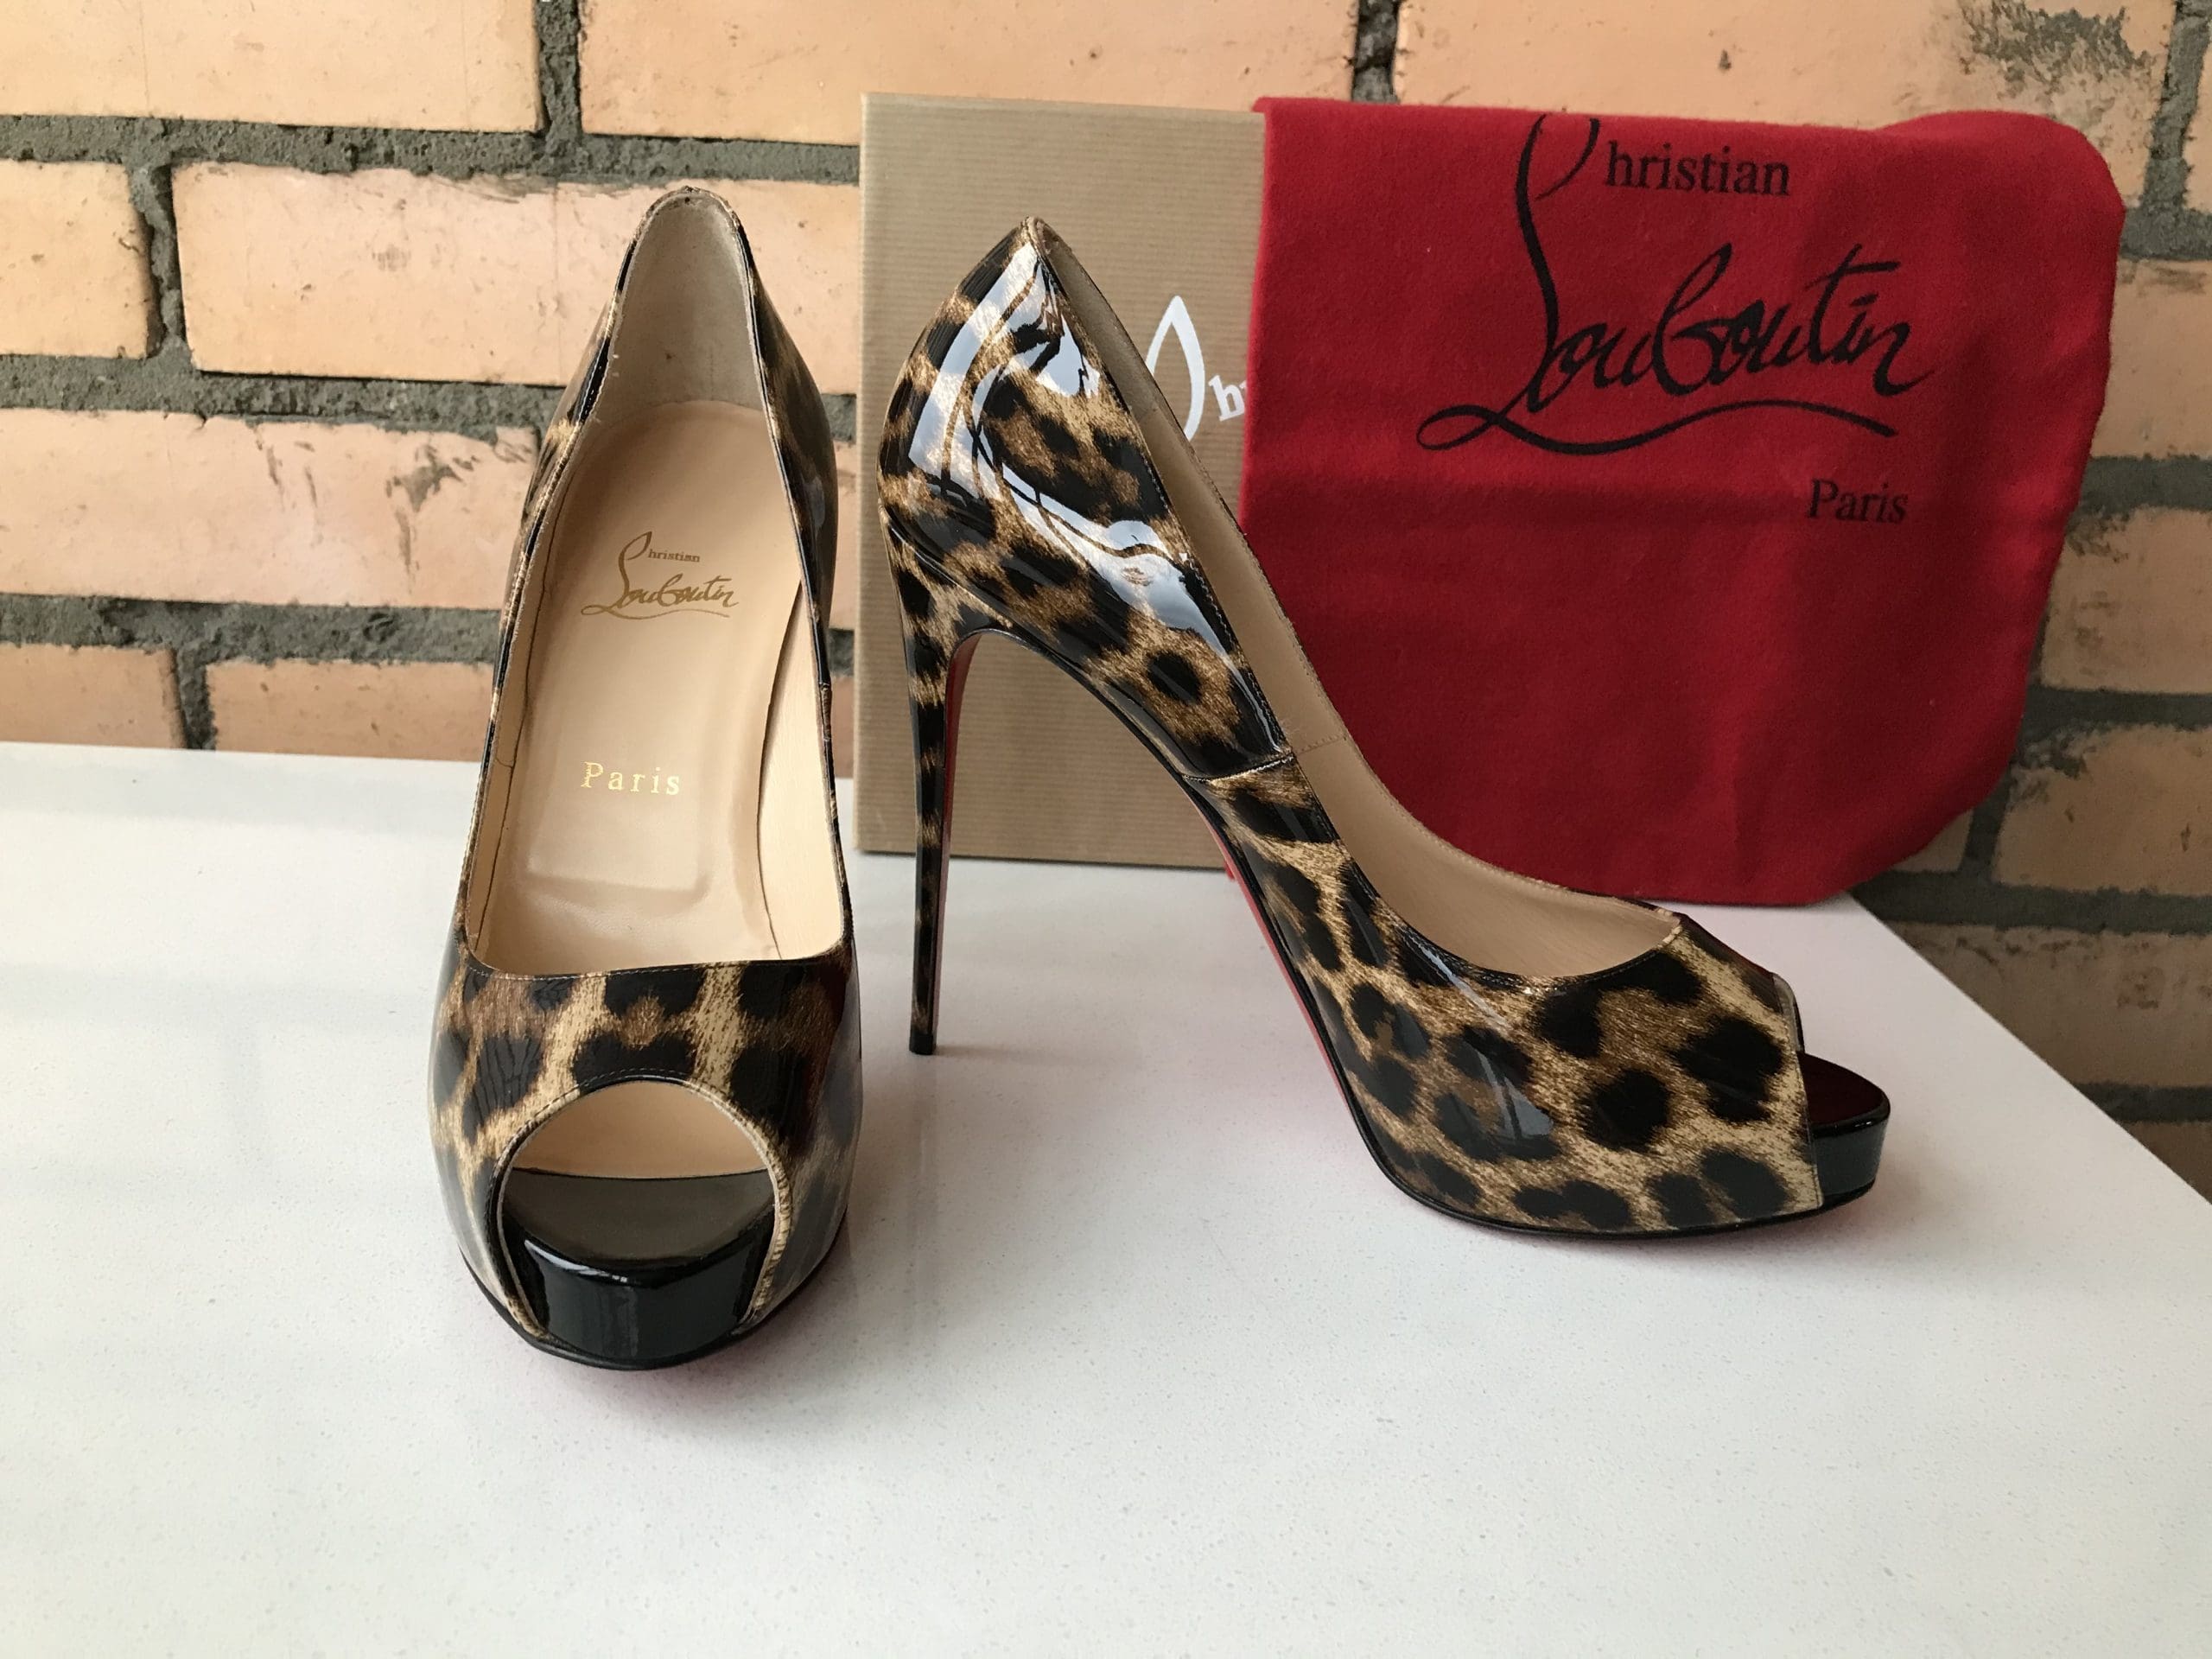 Christian Louboutin New Very Prive Patent Red Sole Pumps  Christian  louboutin heels, Christian louboutin, Louboutin